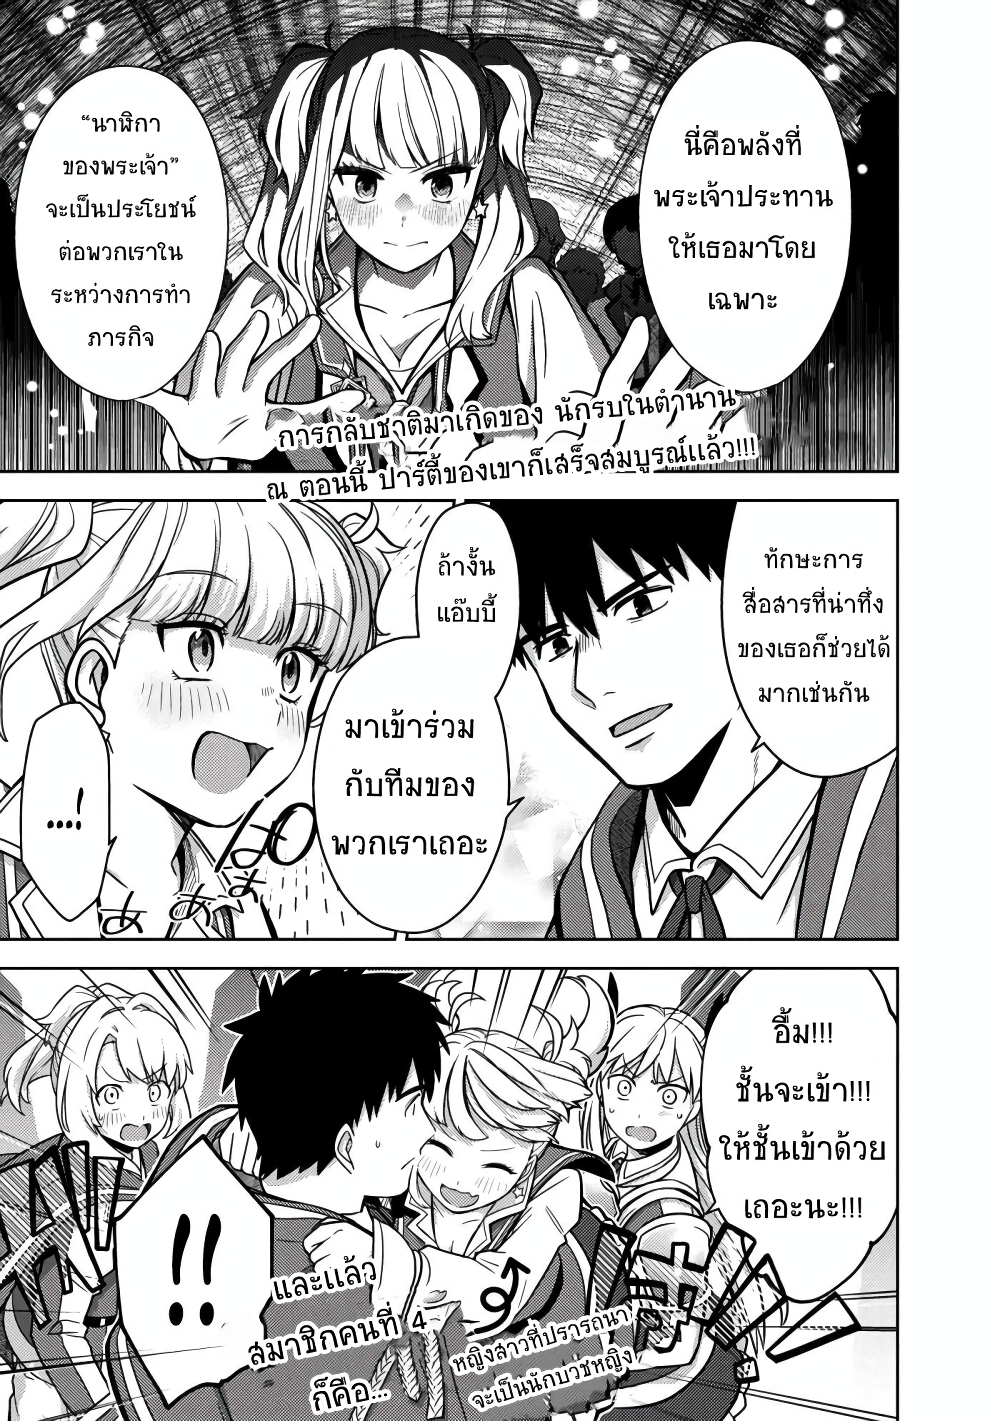 The Reincarnated Swordsman With 9999 Strength Wants to Become a Magician! ตอนที่ 6 (2)